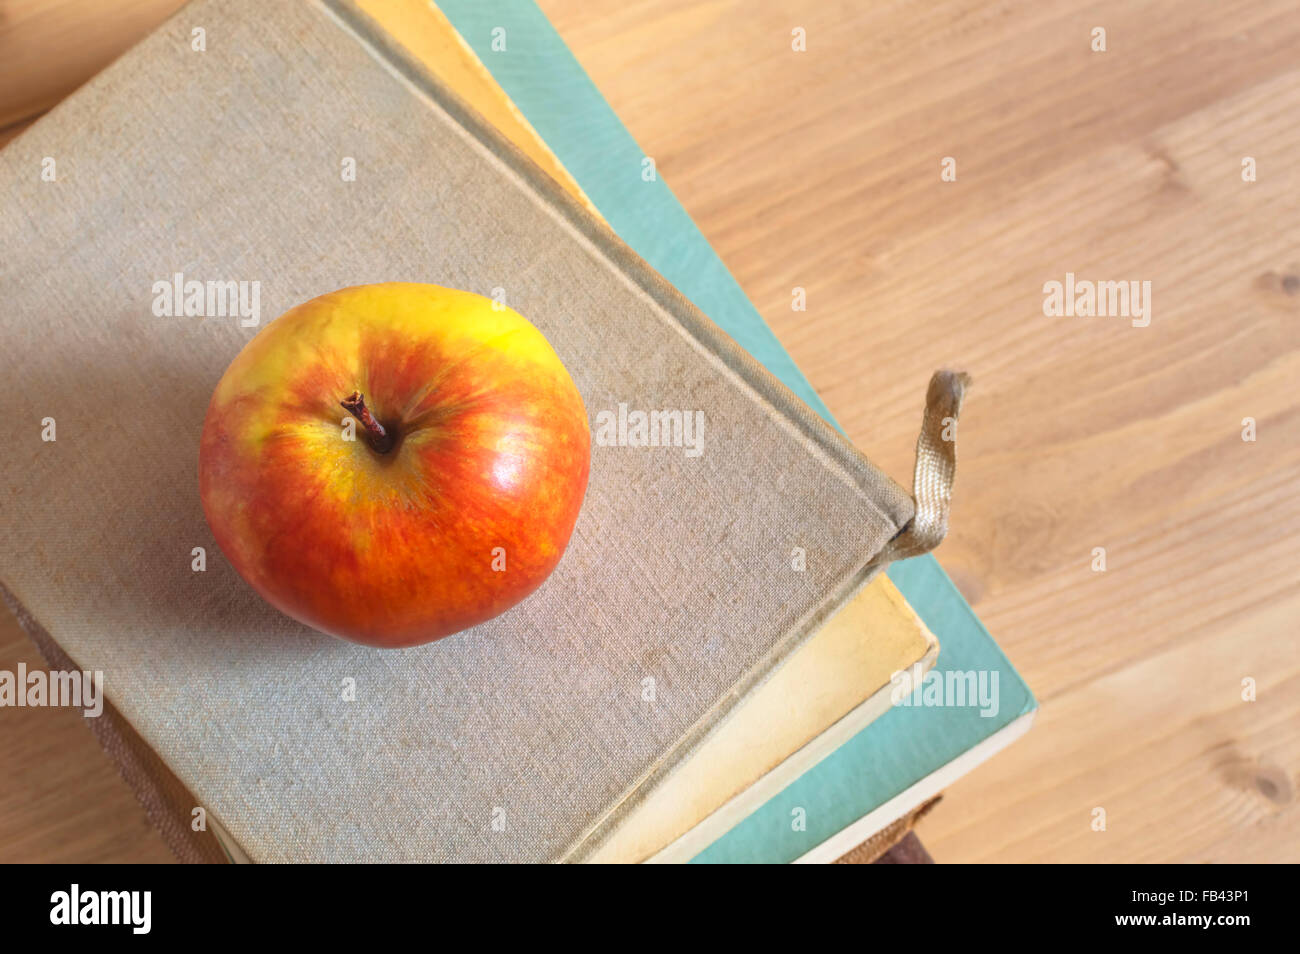 Stack of books and red apple on wooden table. Selective focus. Stock Photo